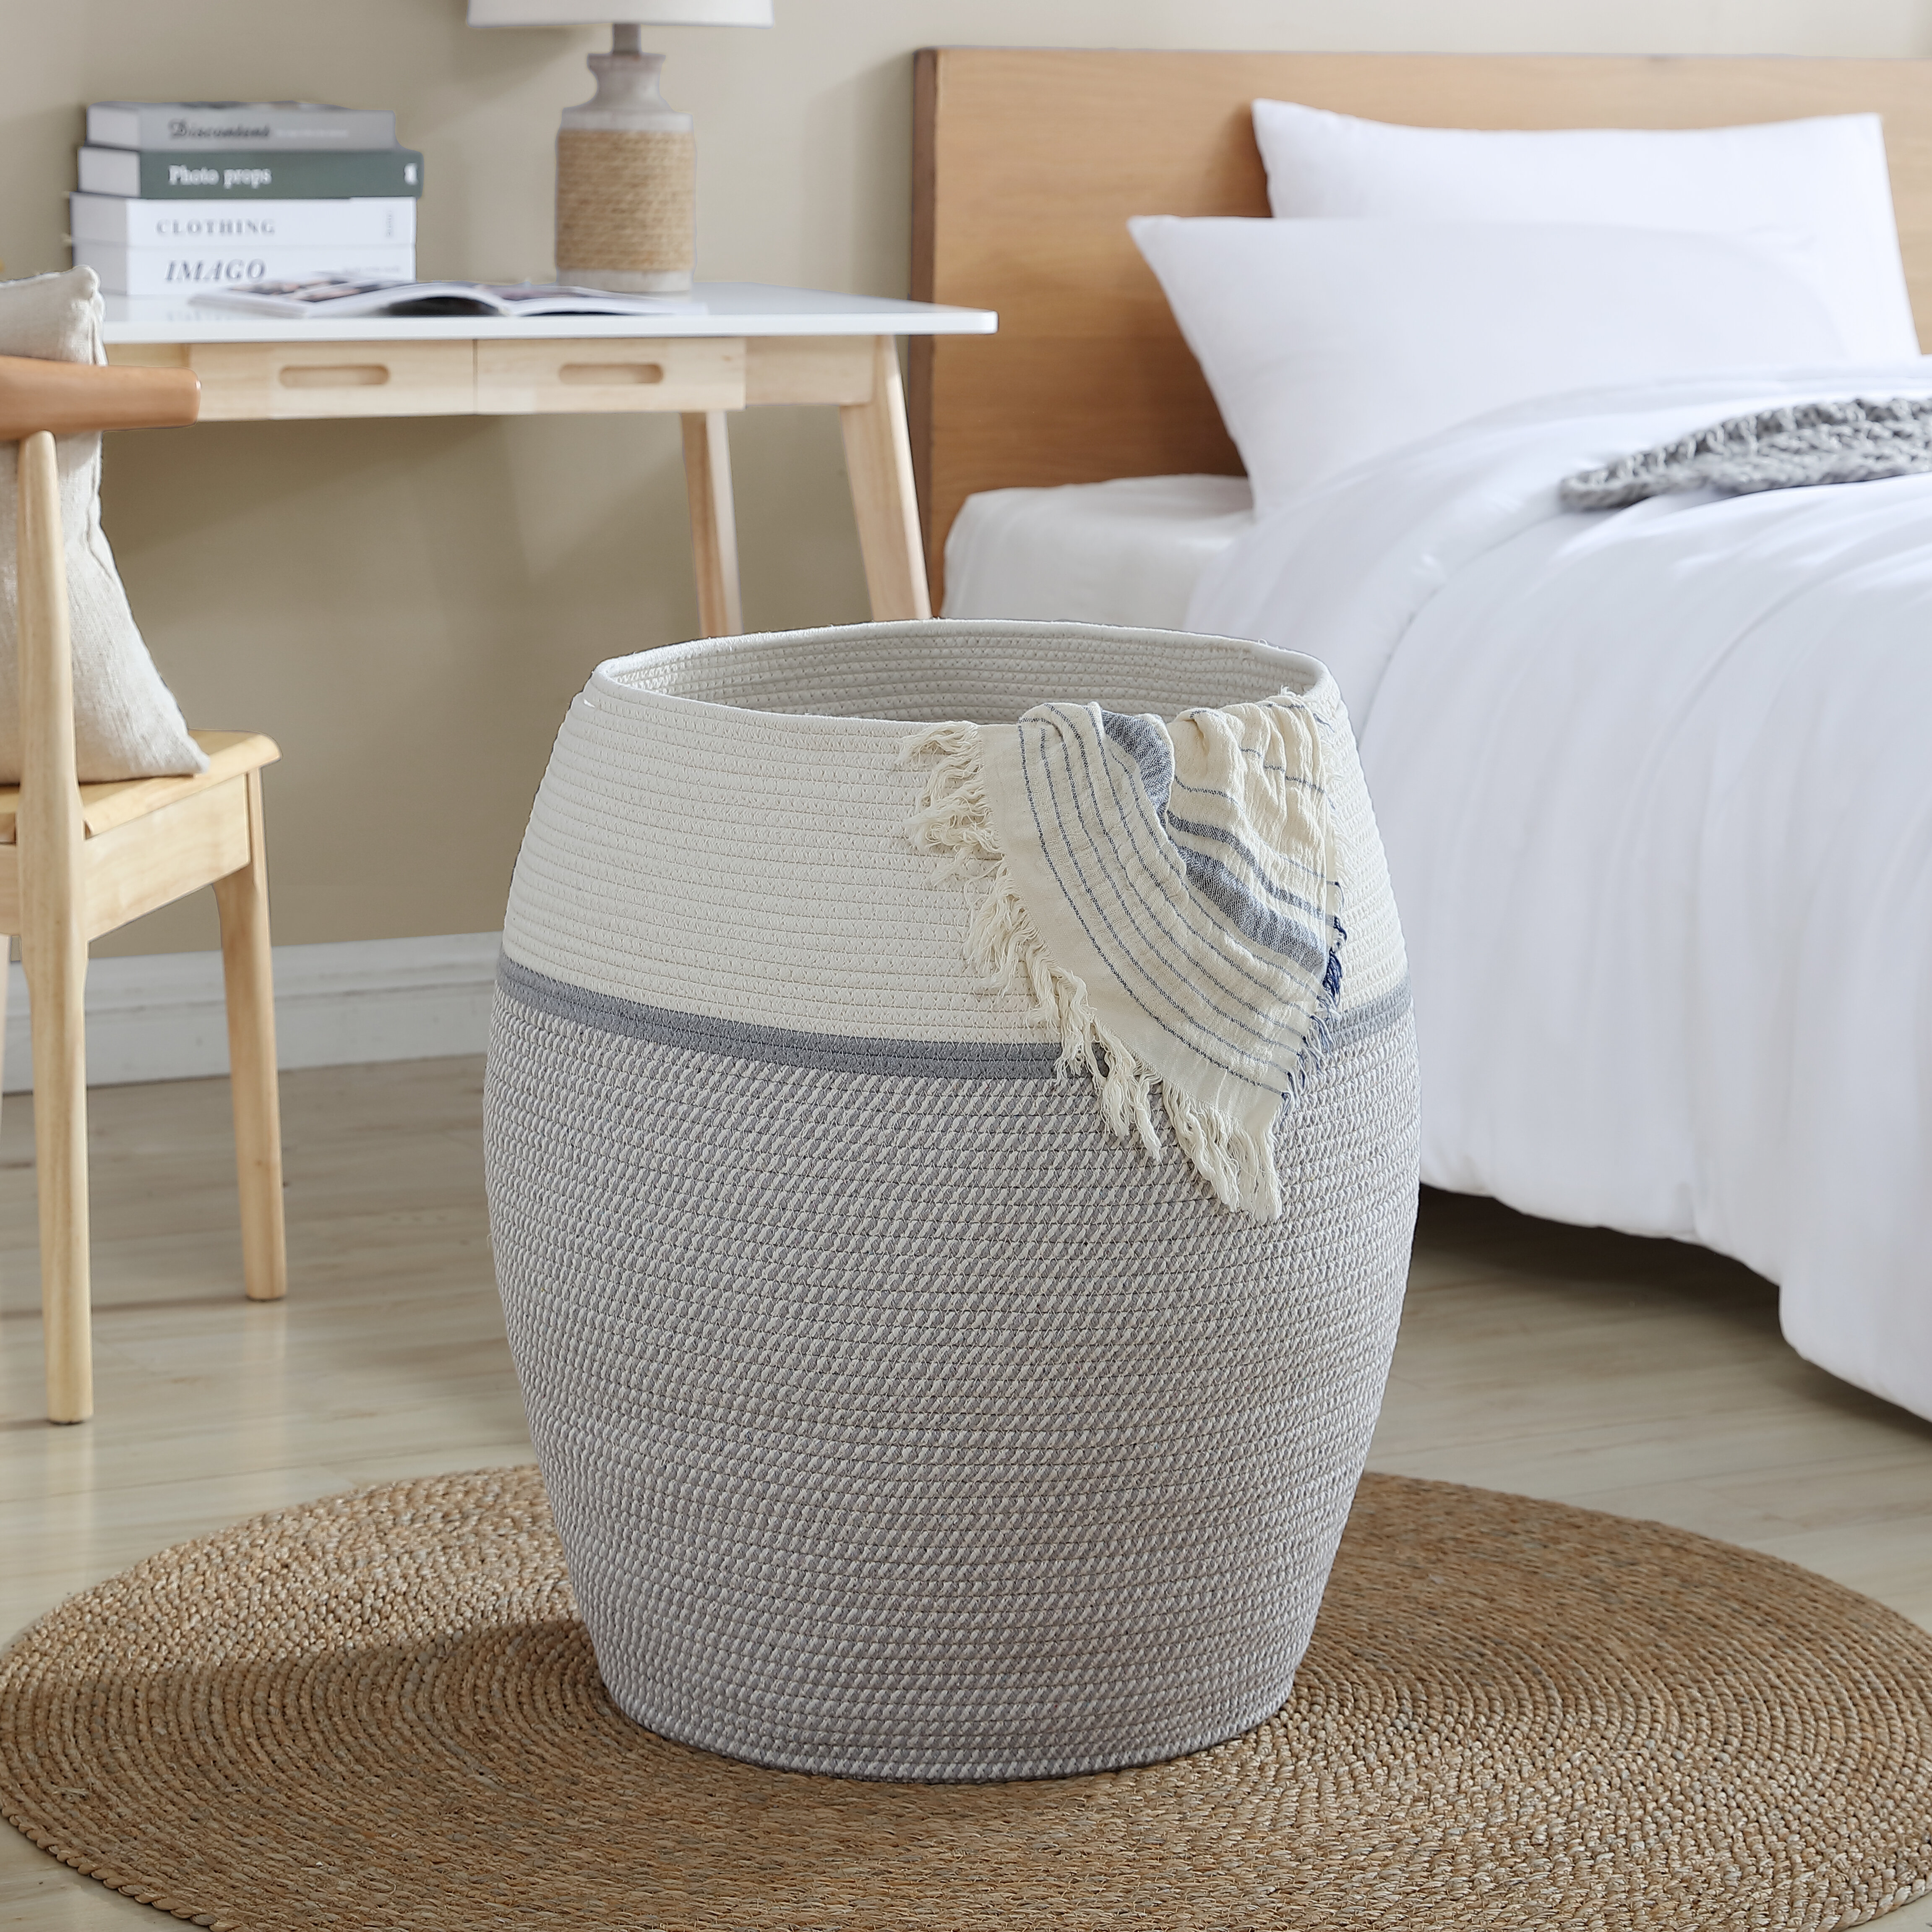 Longshore Tides Extra Large Woven Cotton Rope TallLaundry Hamper